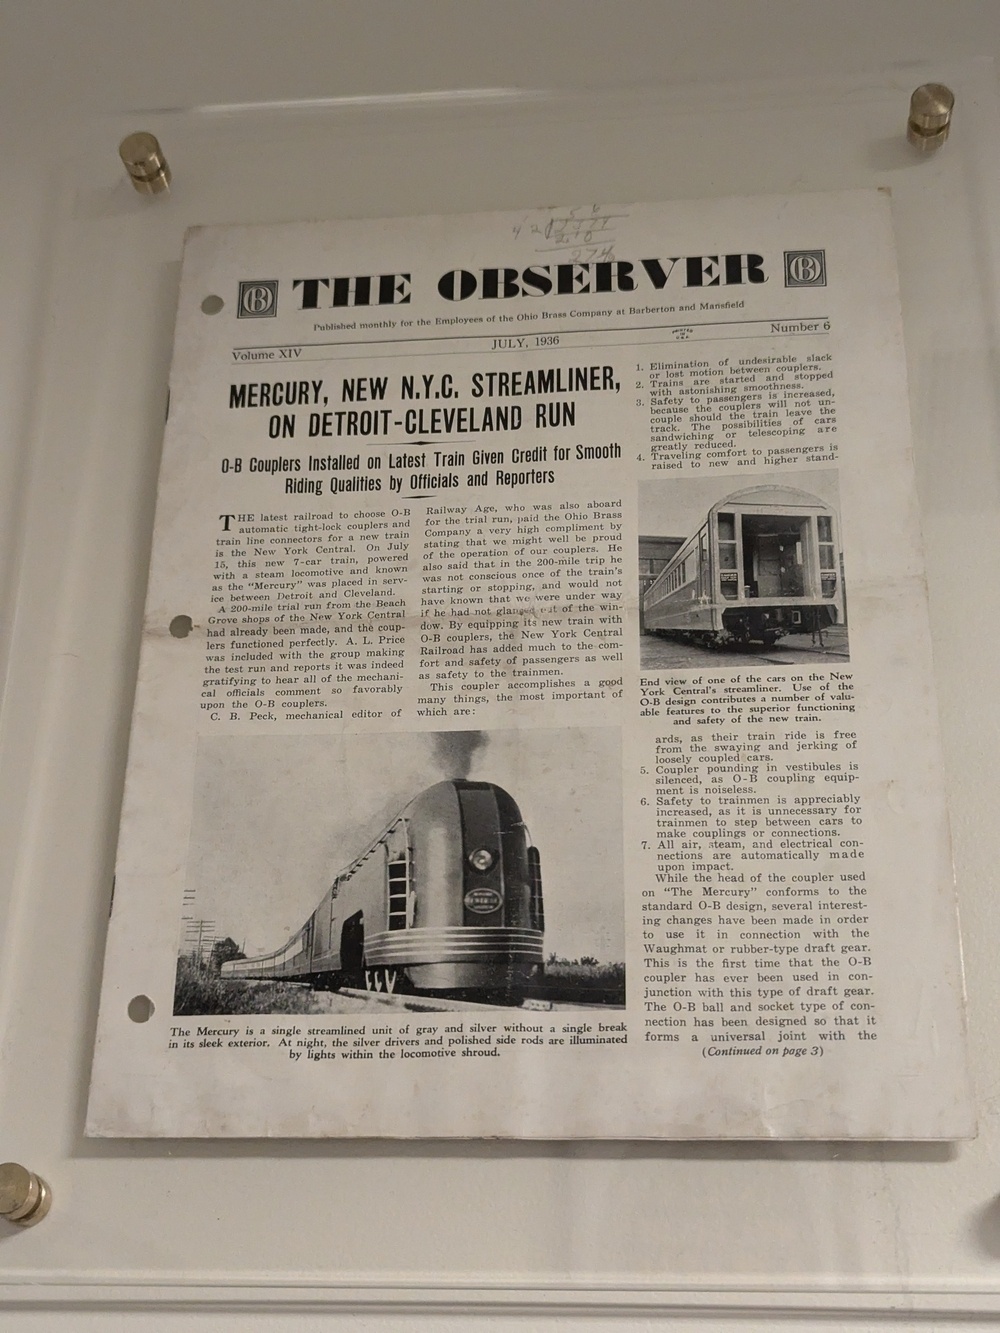 An issue of The Observer from July, 1936 titled "Mercury, New N.Y.C. Streamliner, on Detroit-Cleveland Run"